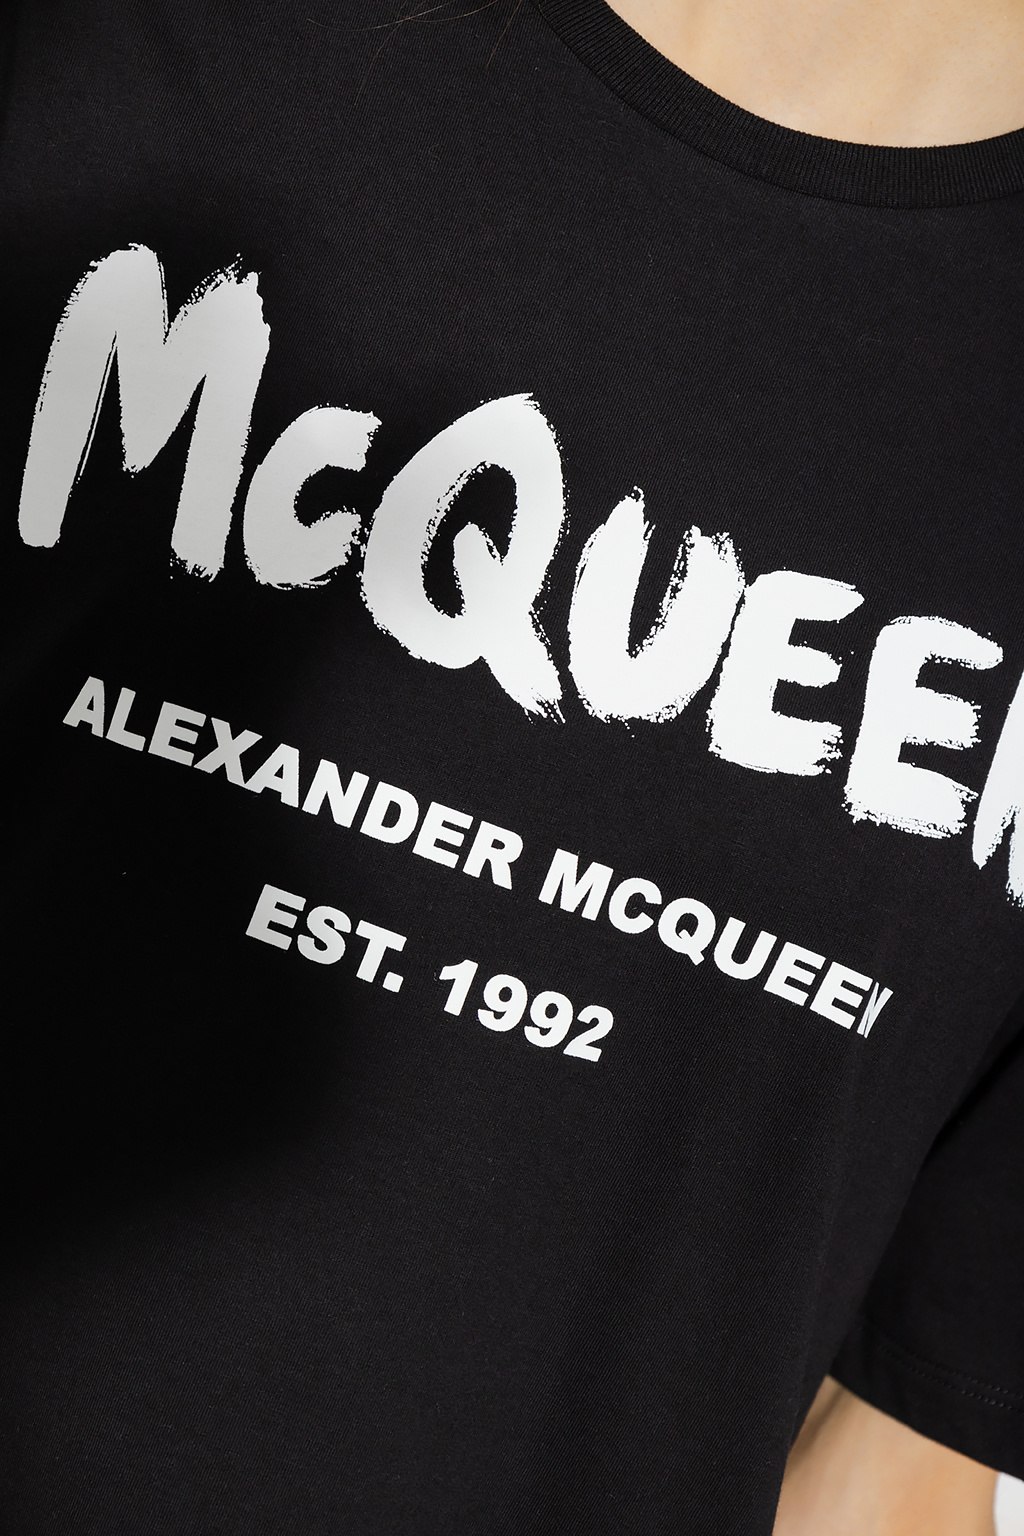 Alexander McQueen Alexander Mcqueen's Scarf Is An Encounter Of Finesse And Duskiness